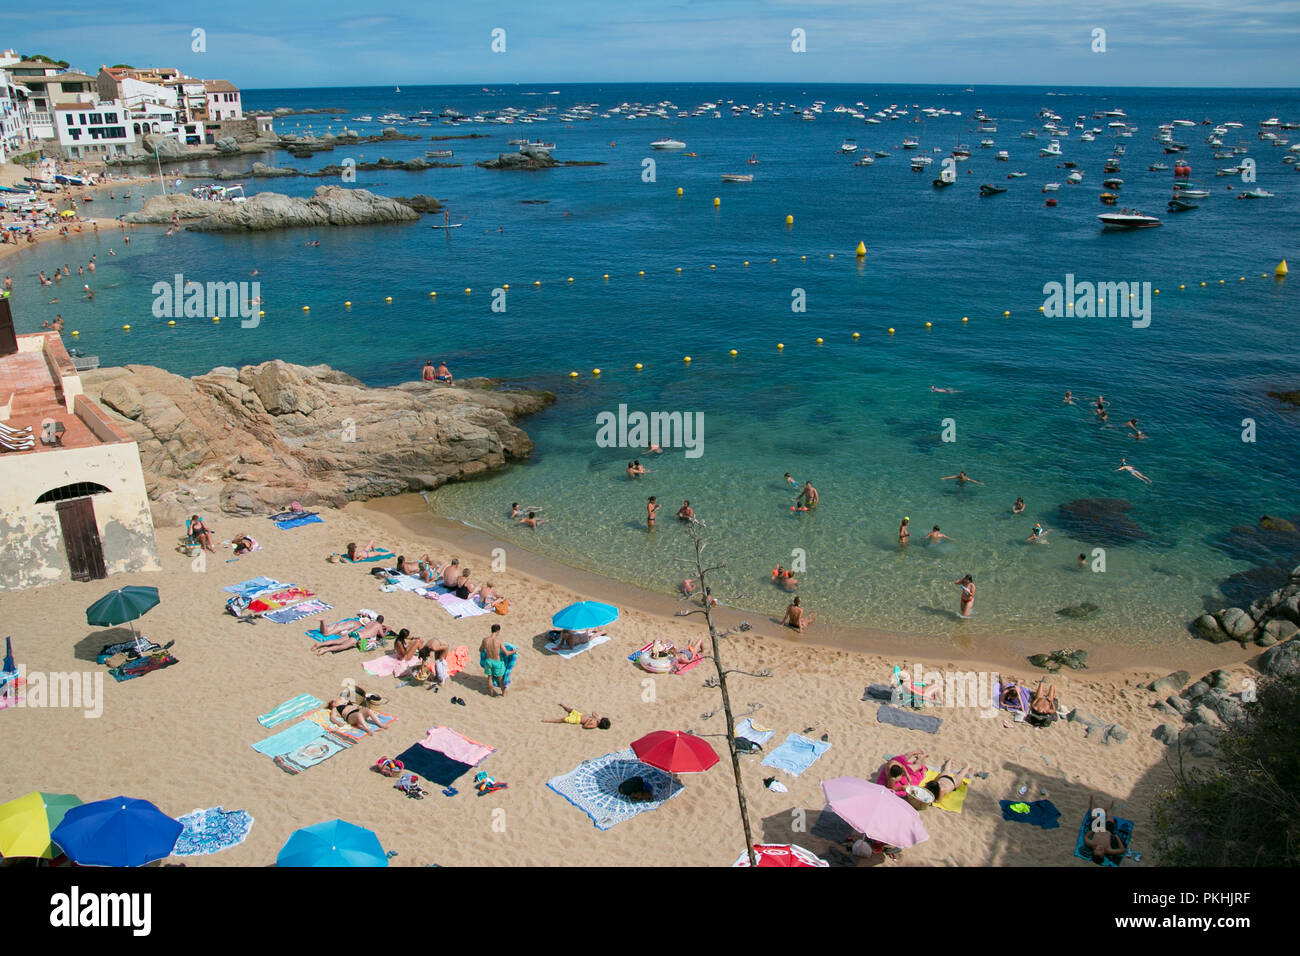 La Platjeta, one of the beaches of the charming village of Calella de palafrugell, located in costa brava, spain. View from above with people bathing Stock Photo